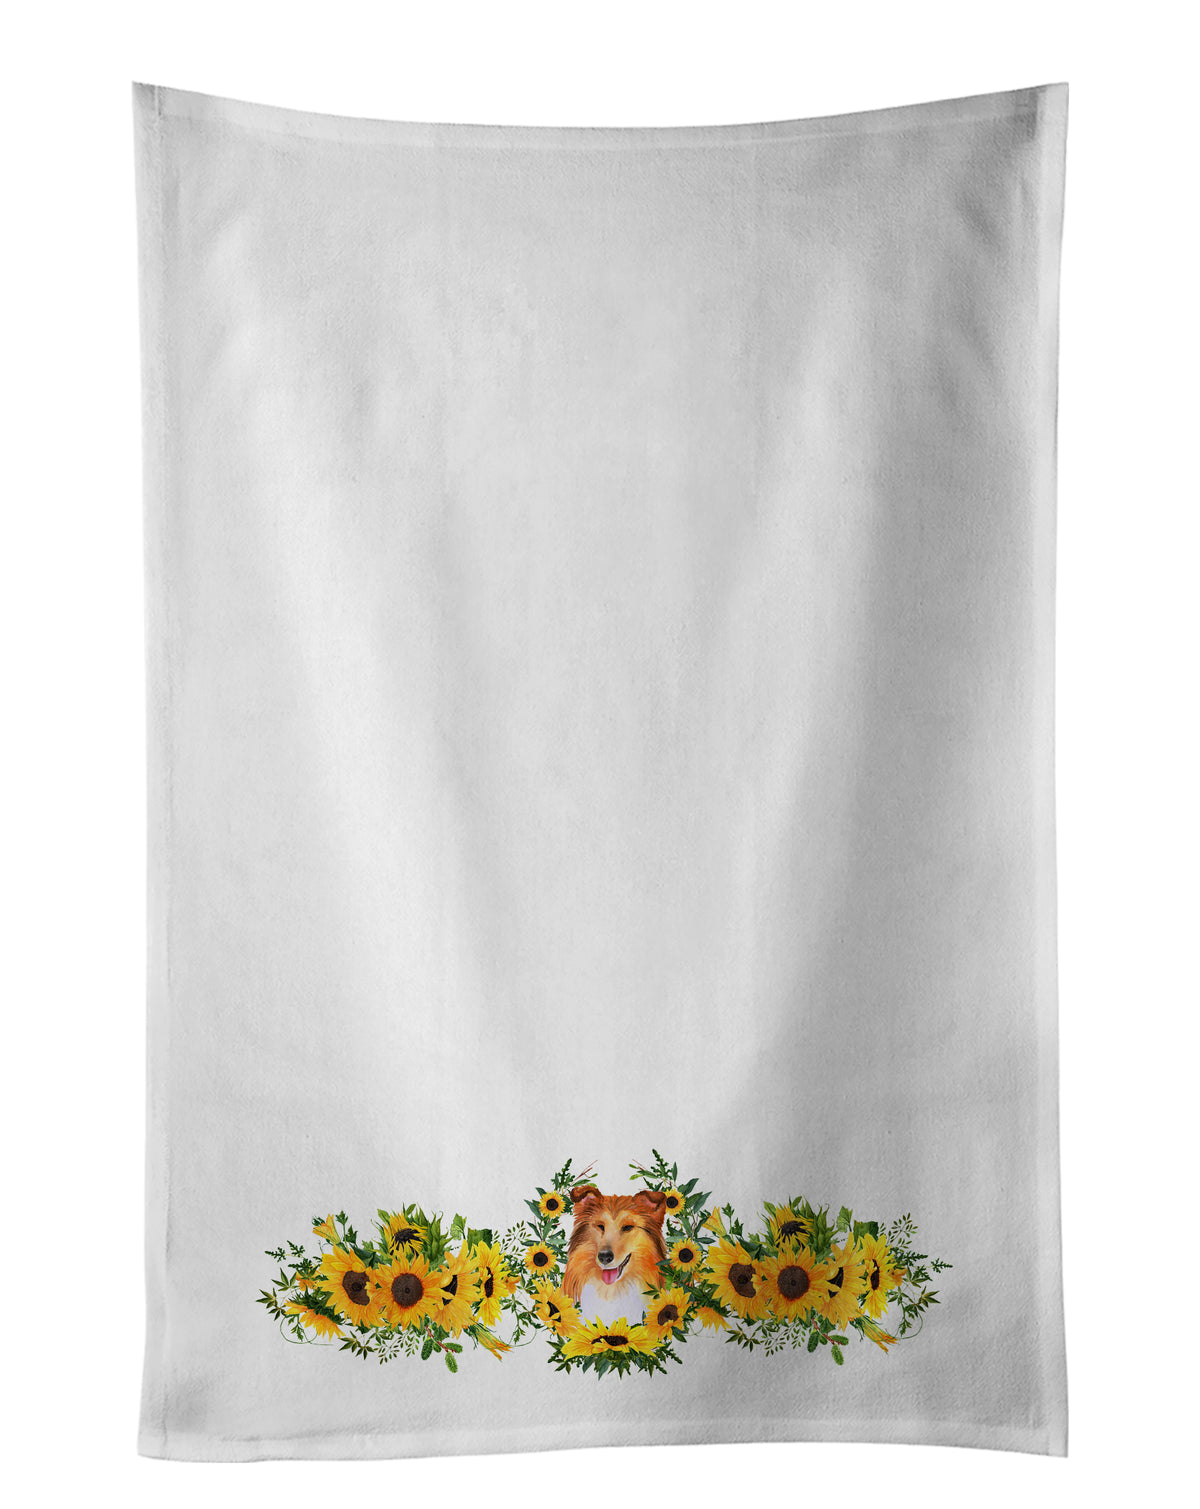 Buy this Sheltie in Sunflowers White Kitchen Towel Set of 2